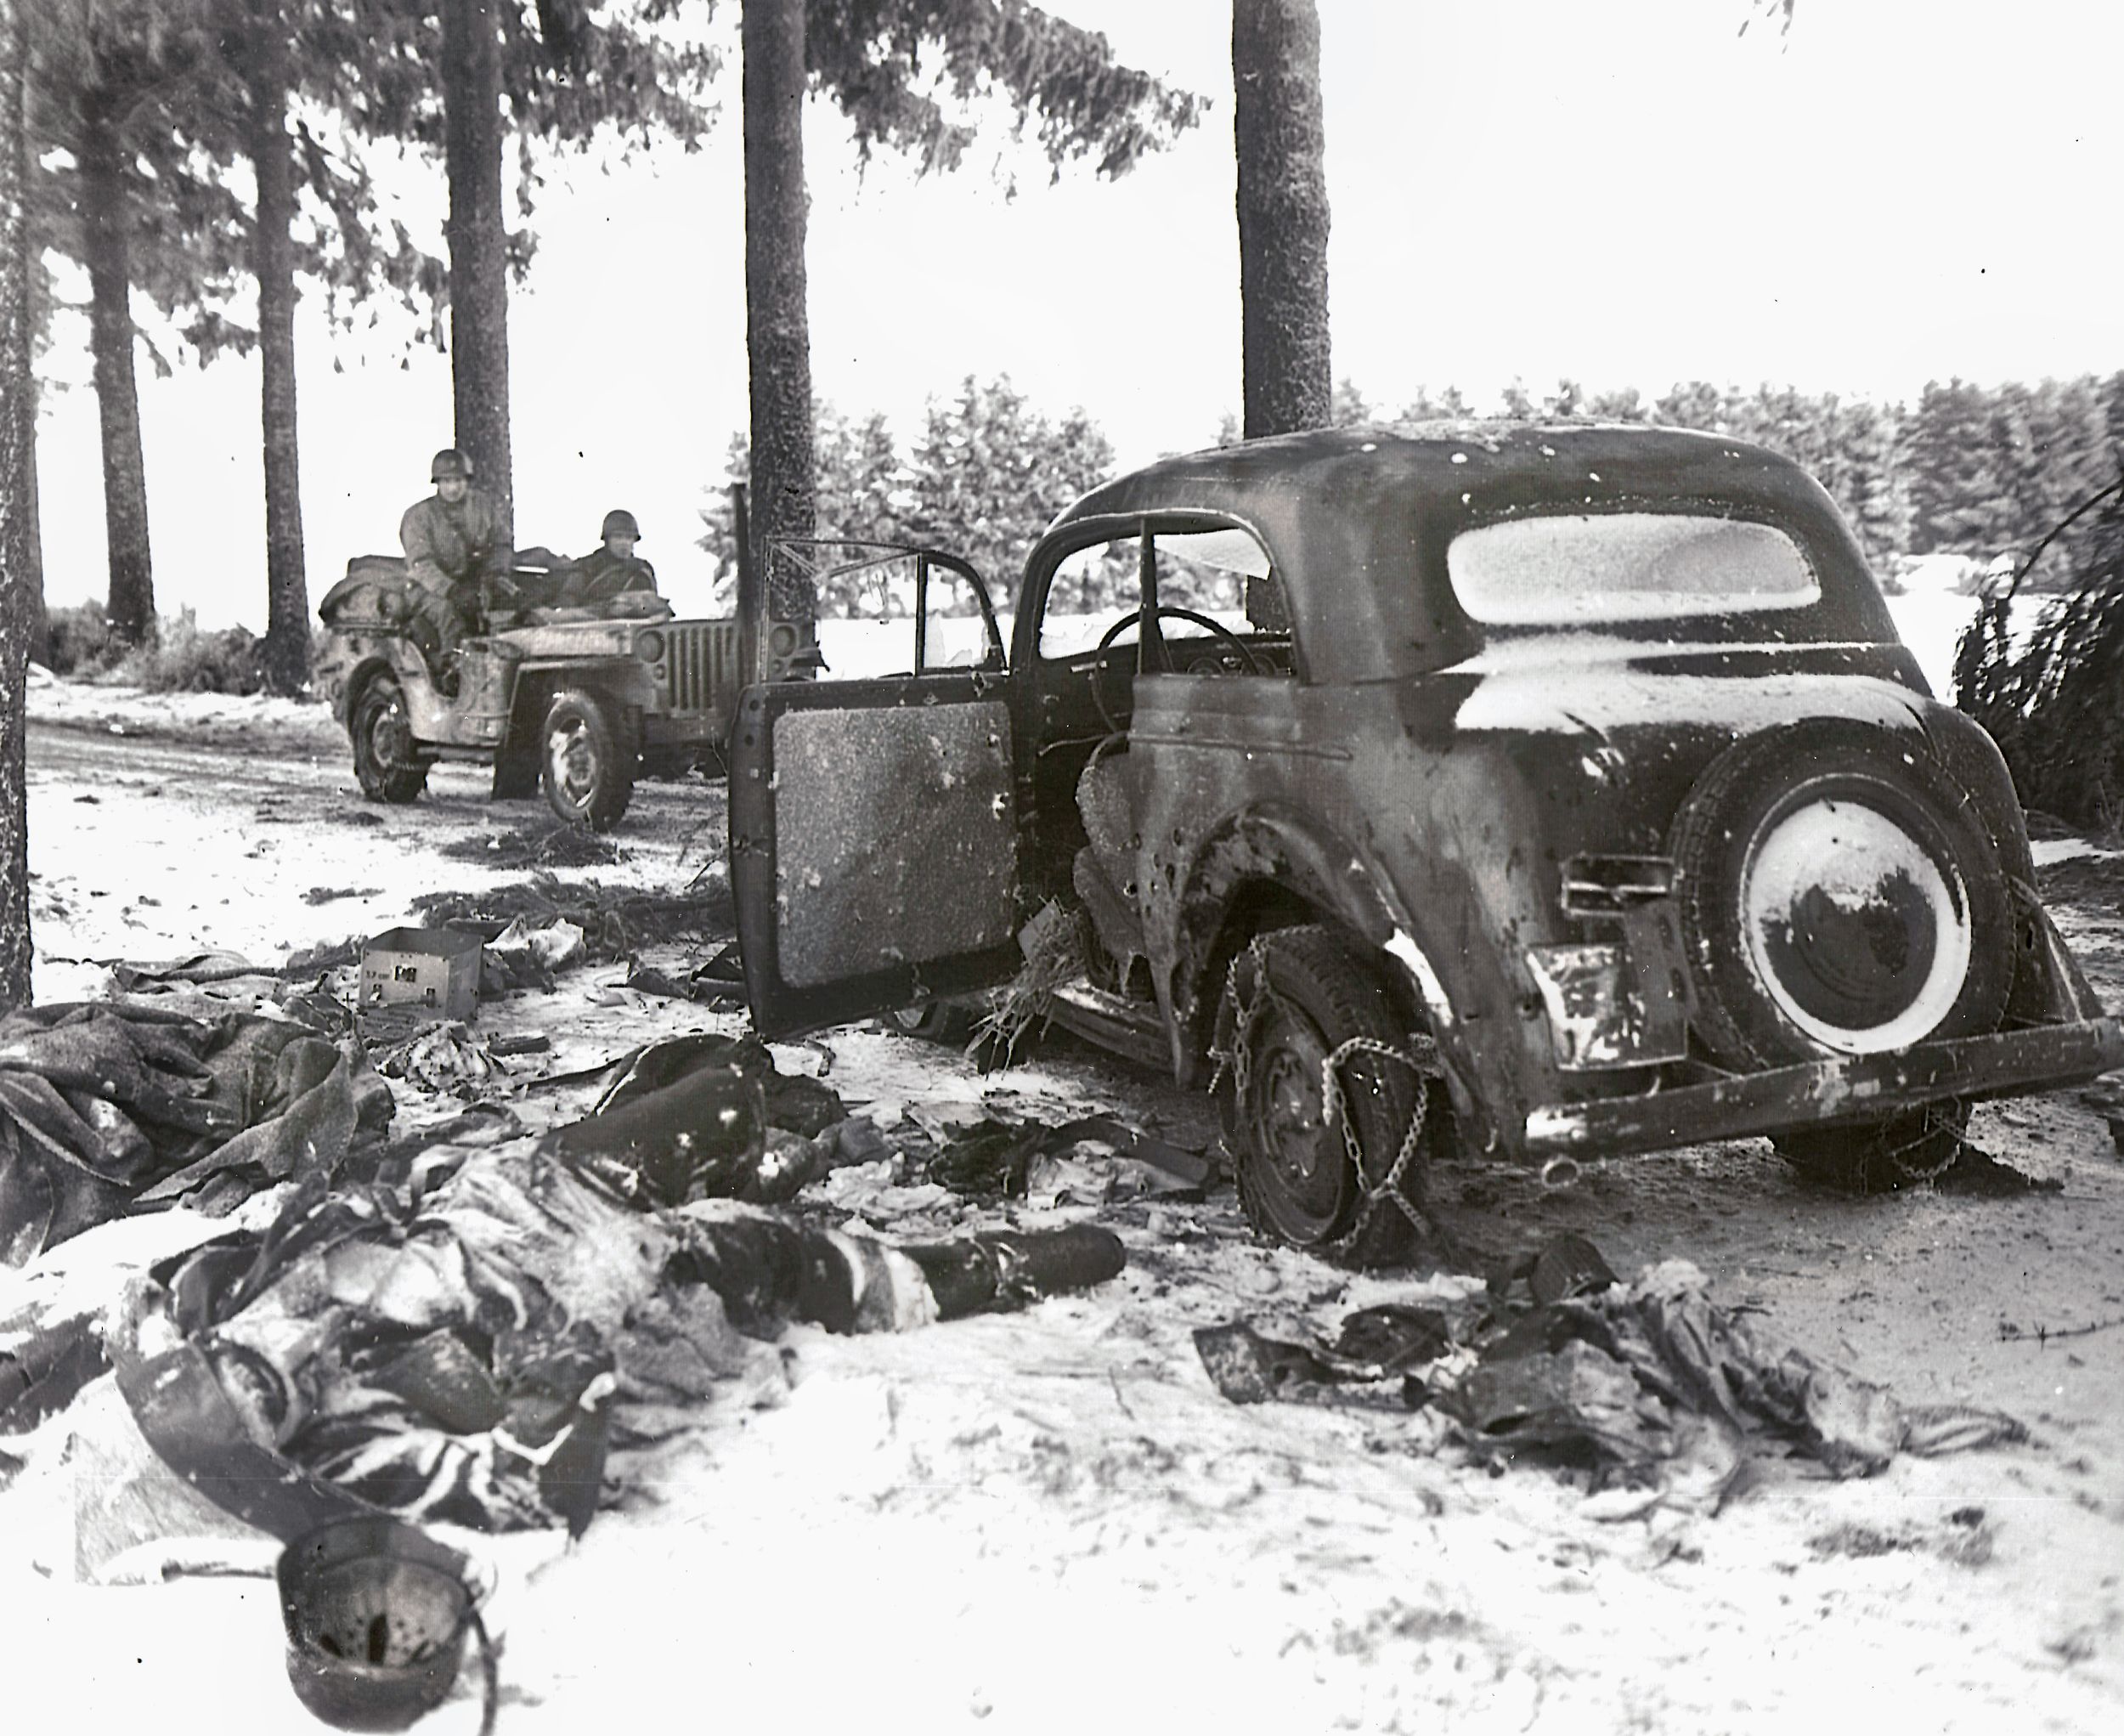 American soldiers drive by a destroyed German vehicle and the bodies of its former occupants during the Battle of the Bulge. U.S. Army PFC Frank Cohn and his team were suspected of being German spies when they were stopped and interrogated at an American checkpoint in Belgium.